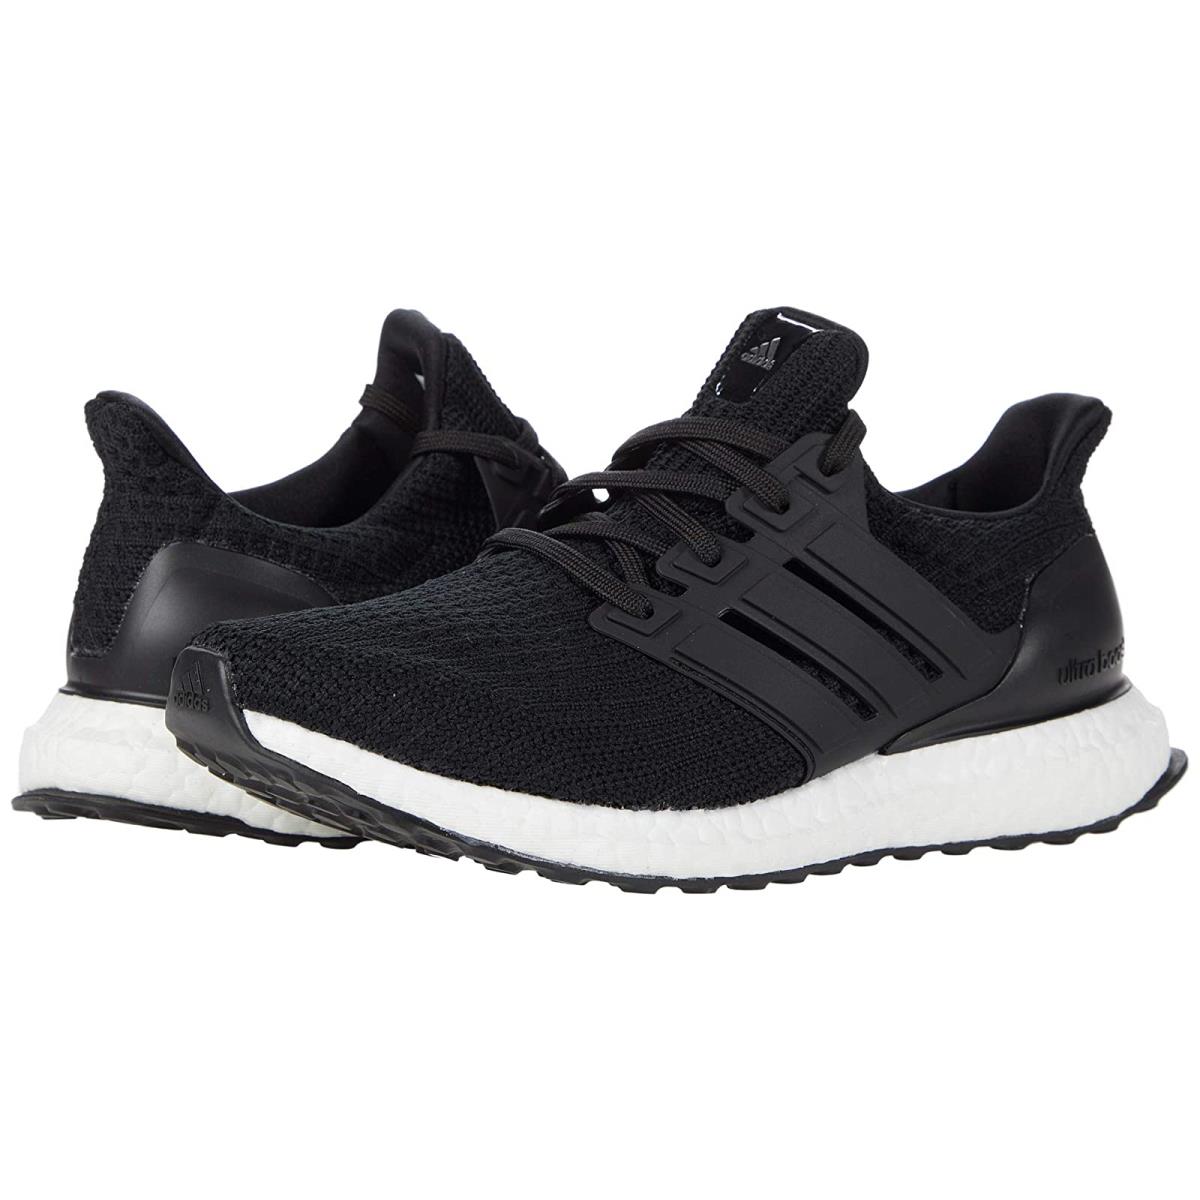 Woman`s Sneakers Athletic Shoes Adidas Running Ultraboost Dna Black/Black/White